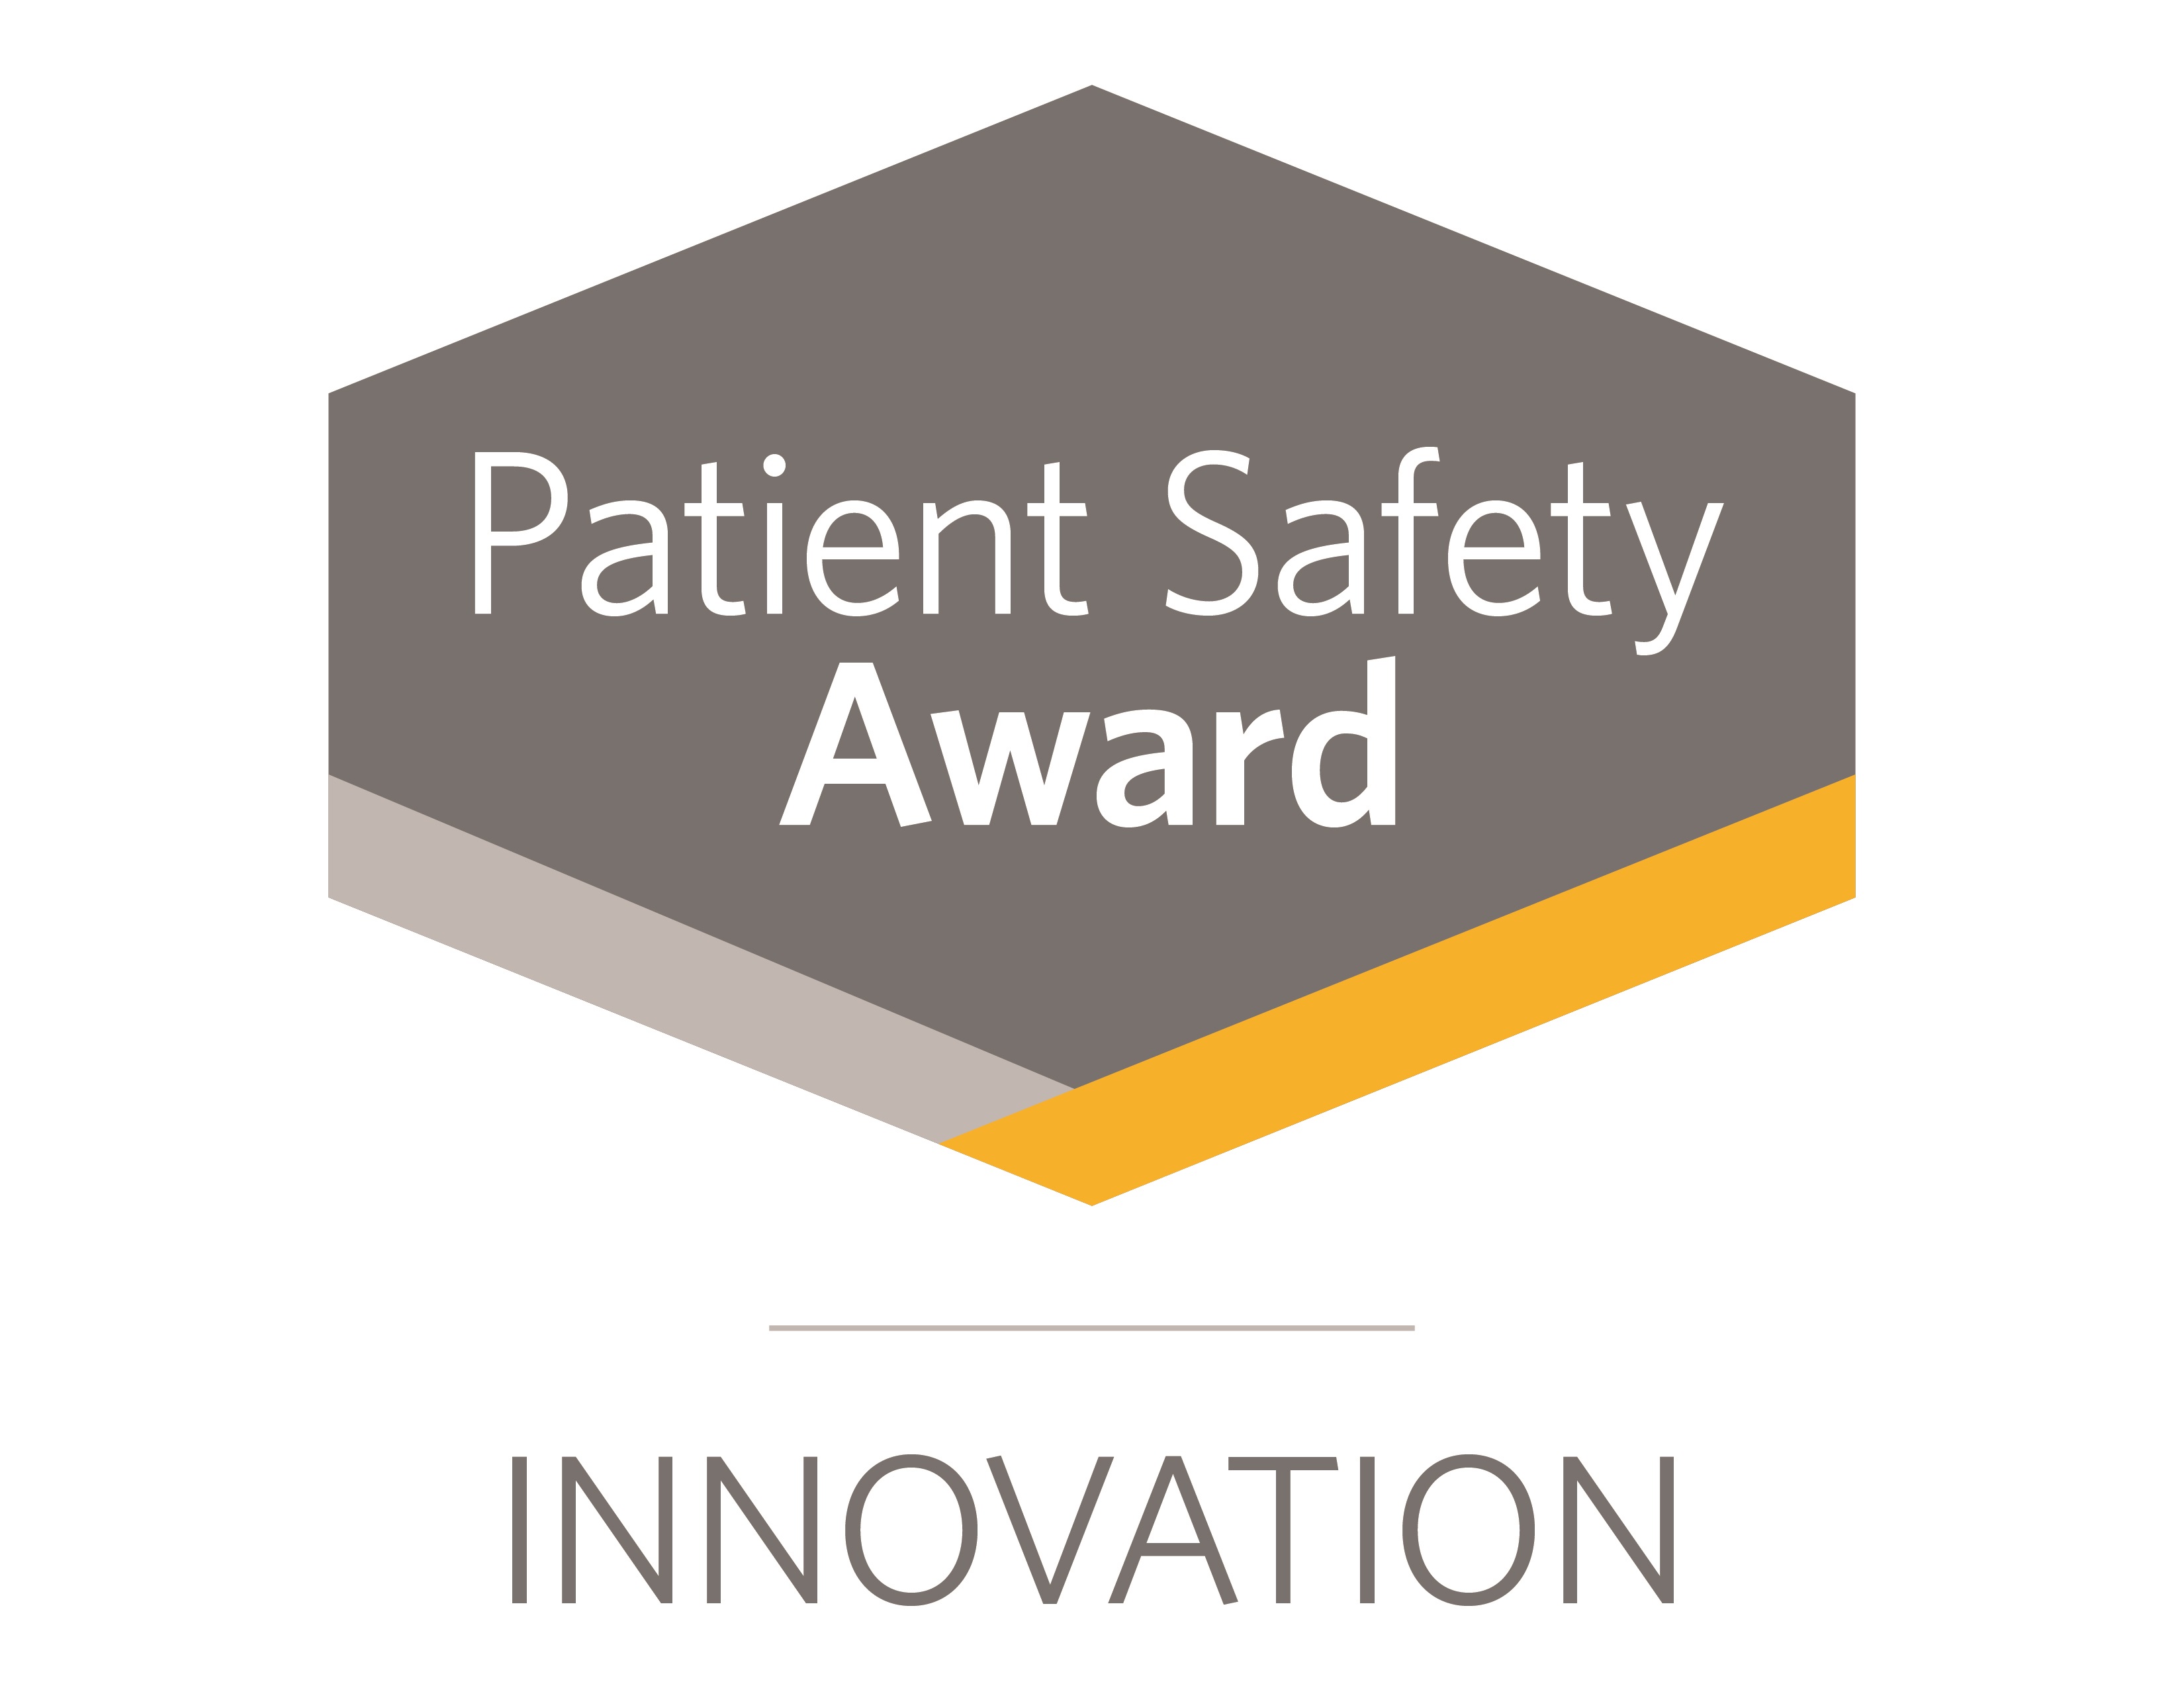 Patient Safety Innovation